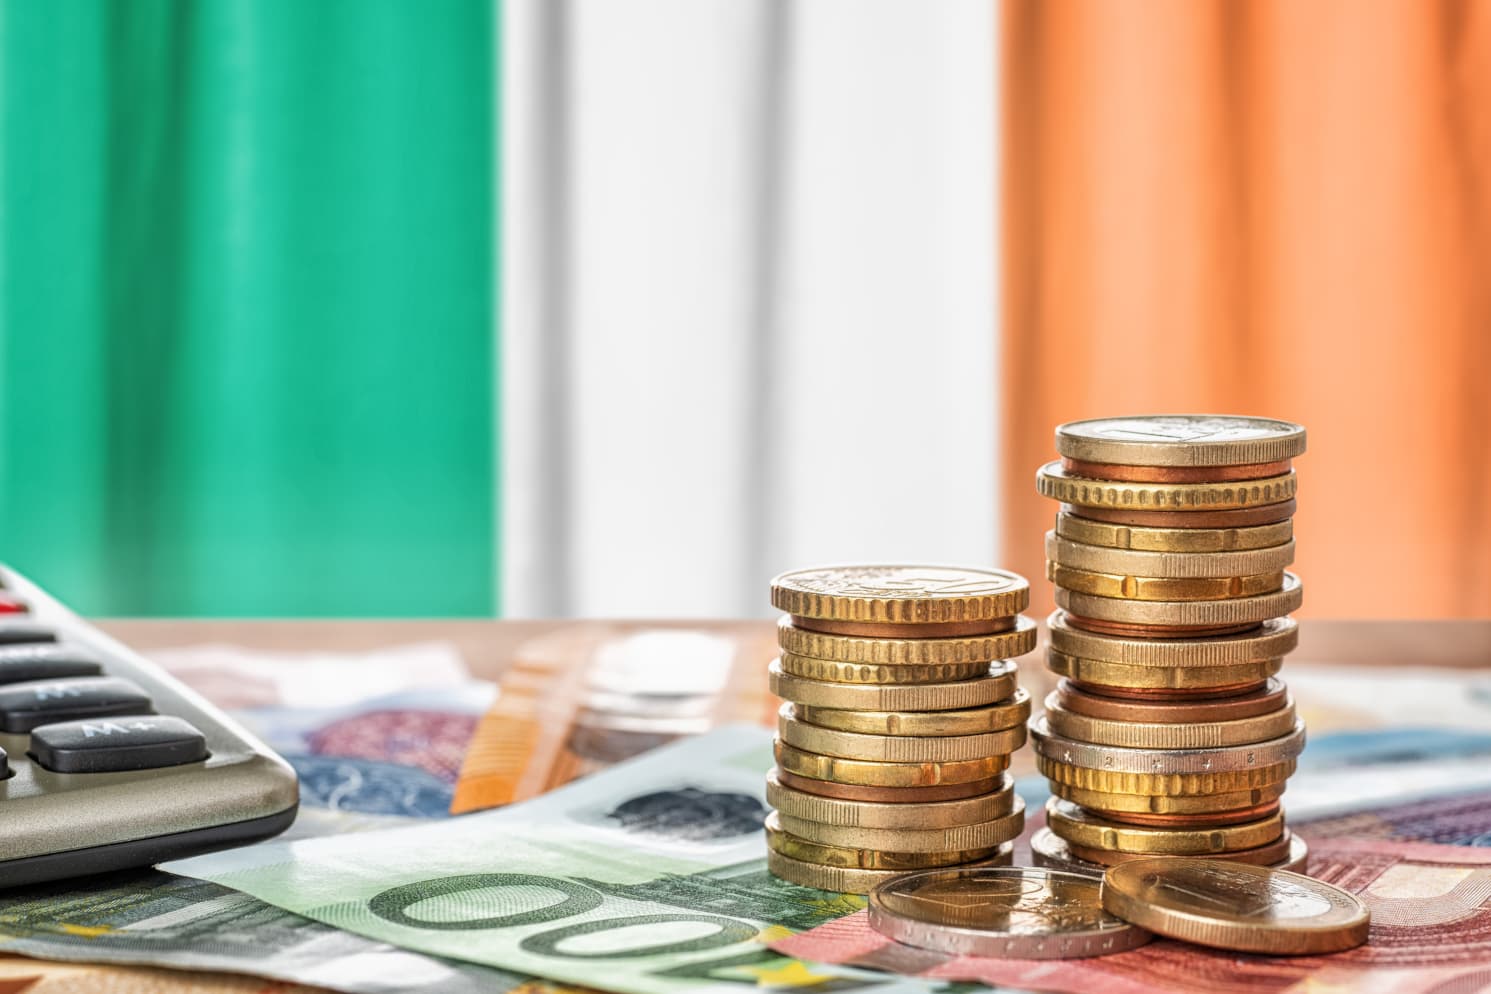 Euro banknotes, coins and a calculator in front of the national flag of Ireland